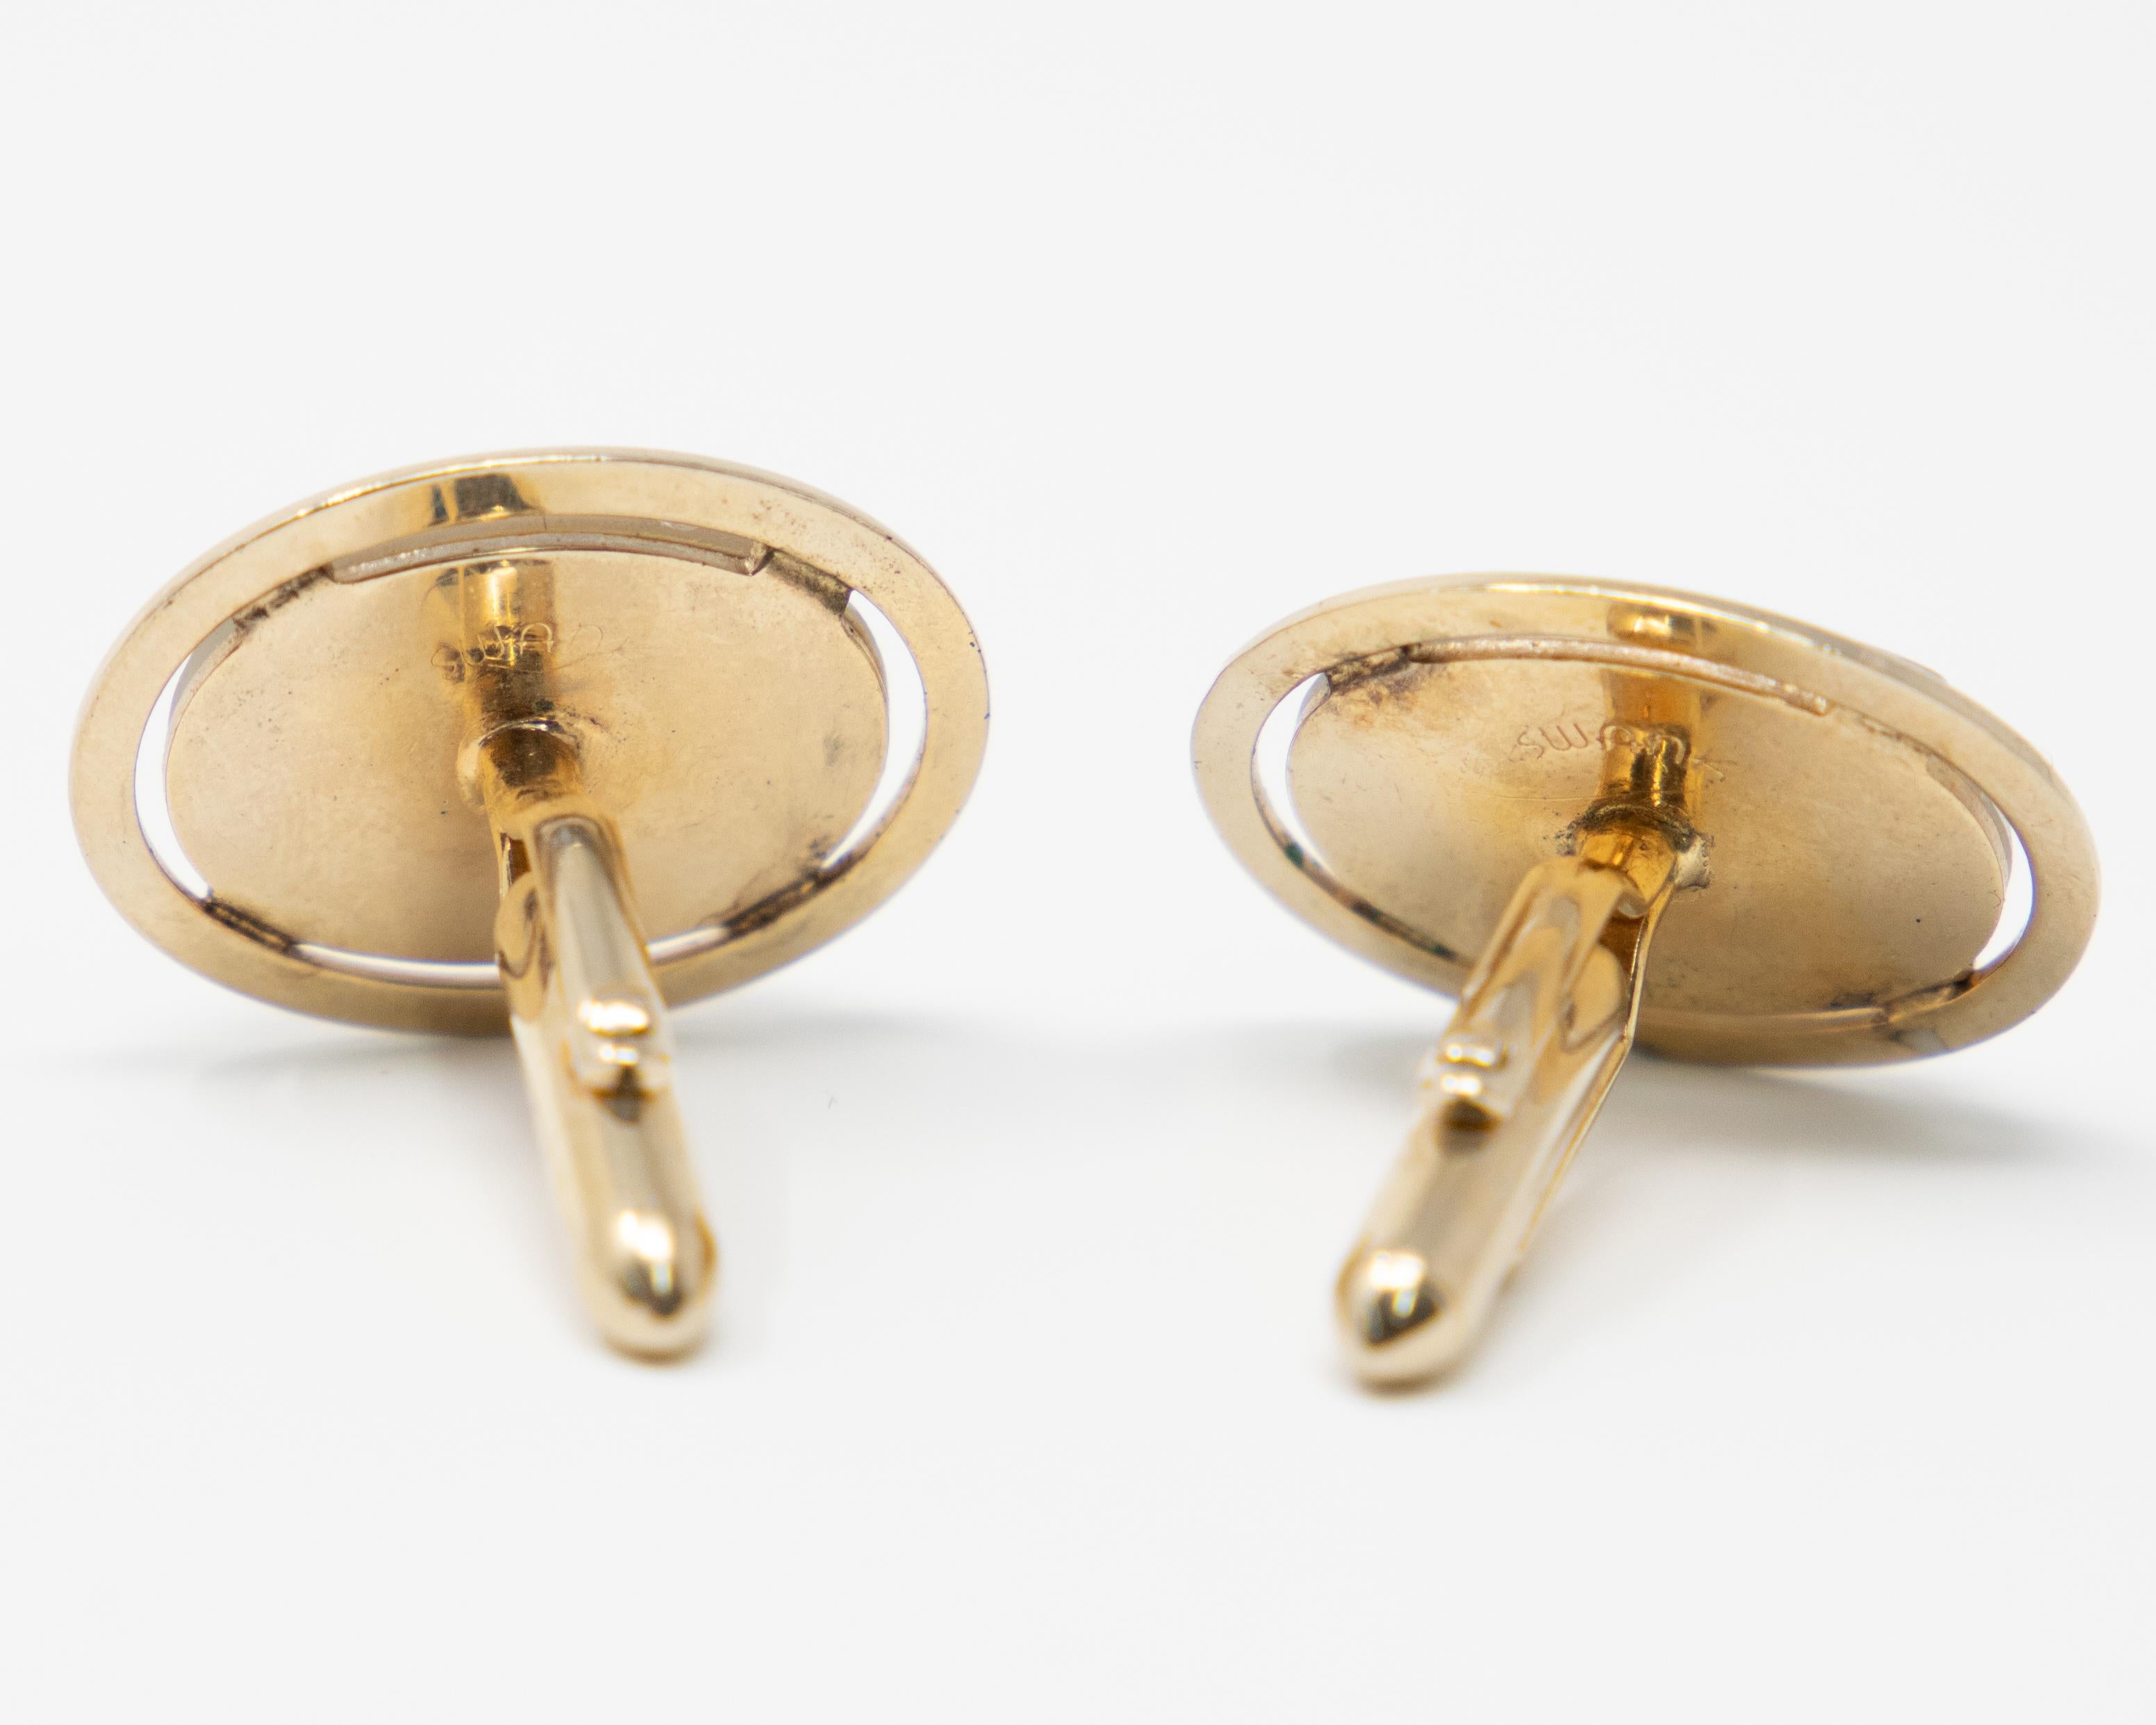 Hand-Crafted Cufflinks with Enameled Horse Head by Swank For Sale